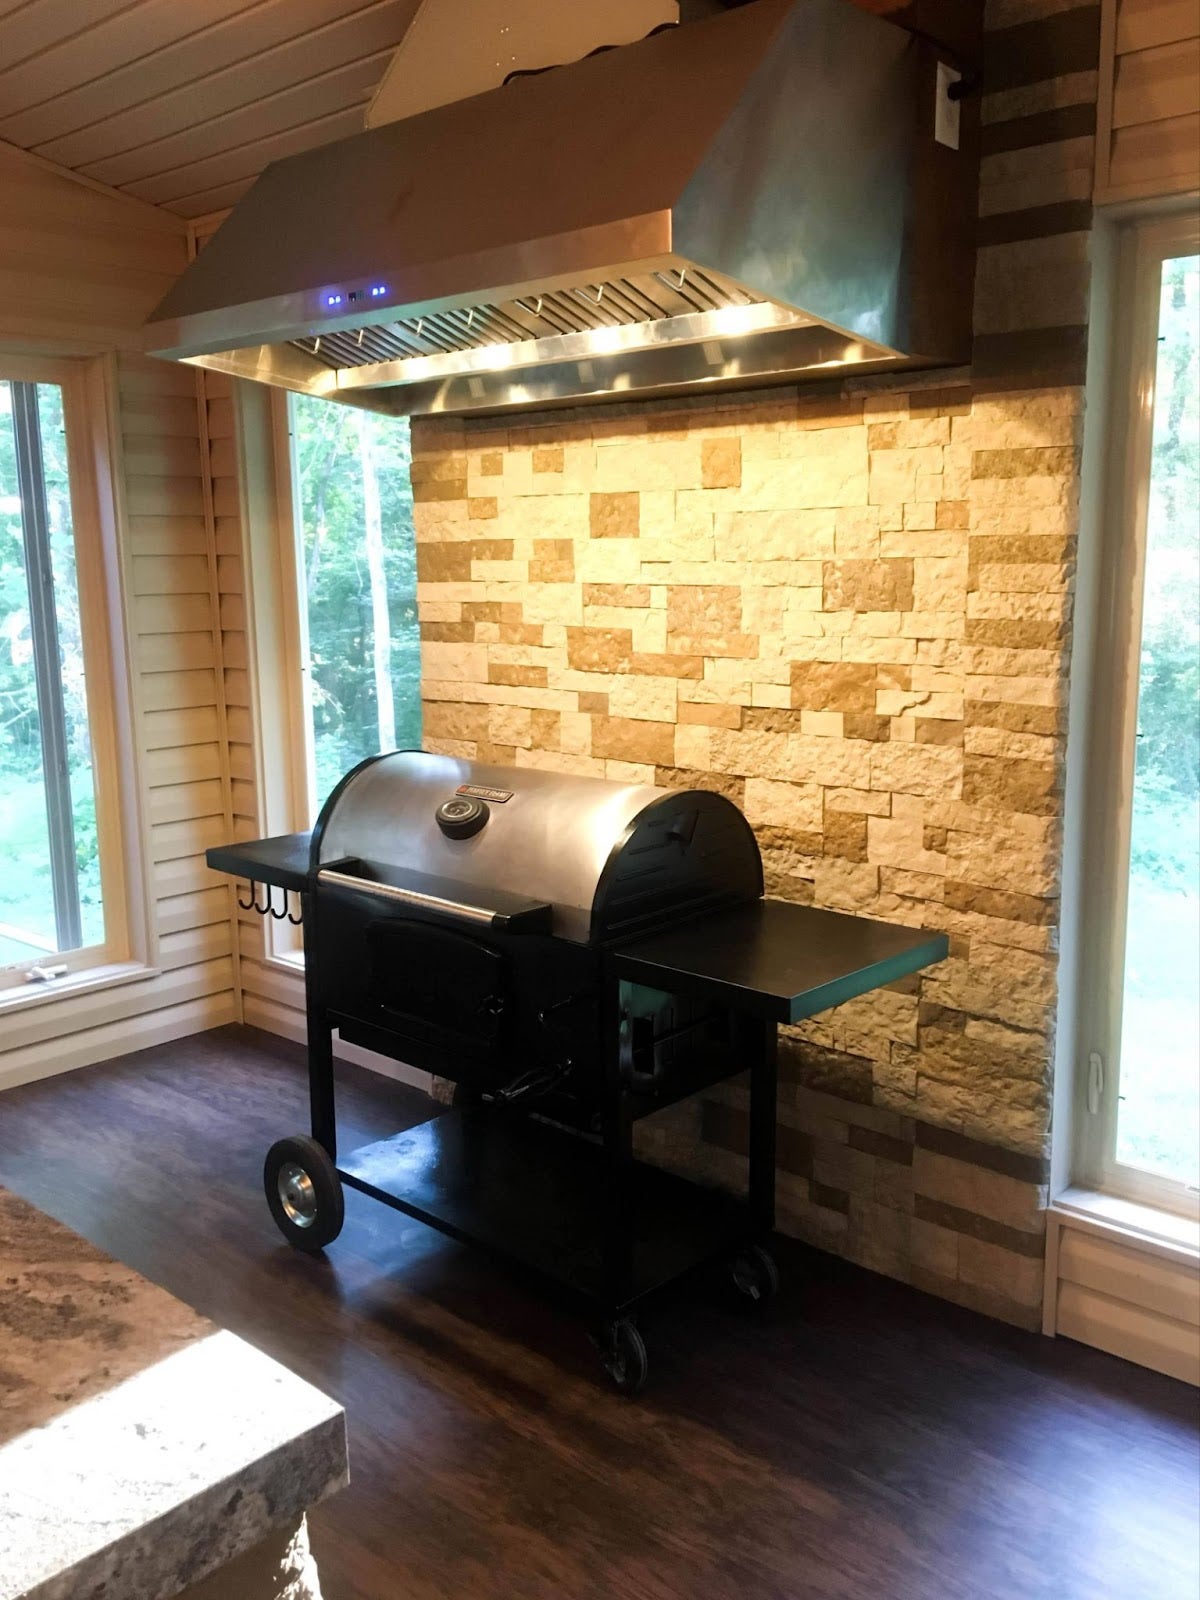 Indoor grilling area with a large black barbecue grill and a stainless steel Proline range hood against a stone wall - prolinerangehoods.com